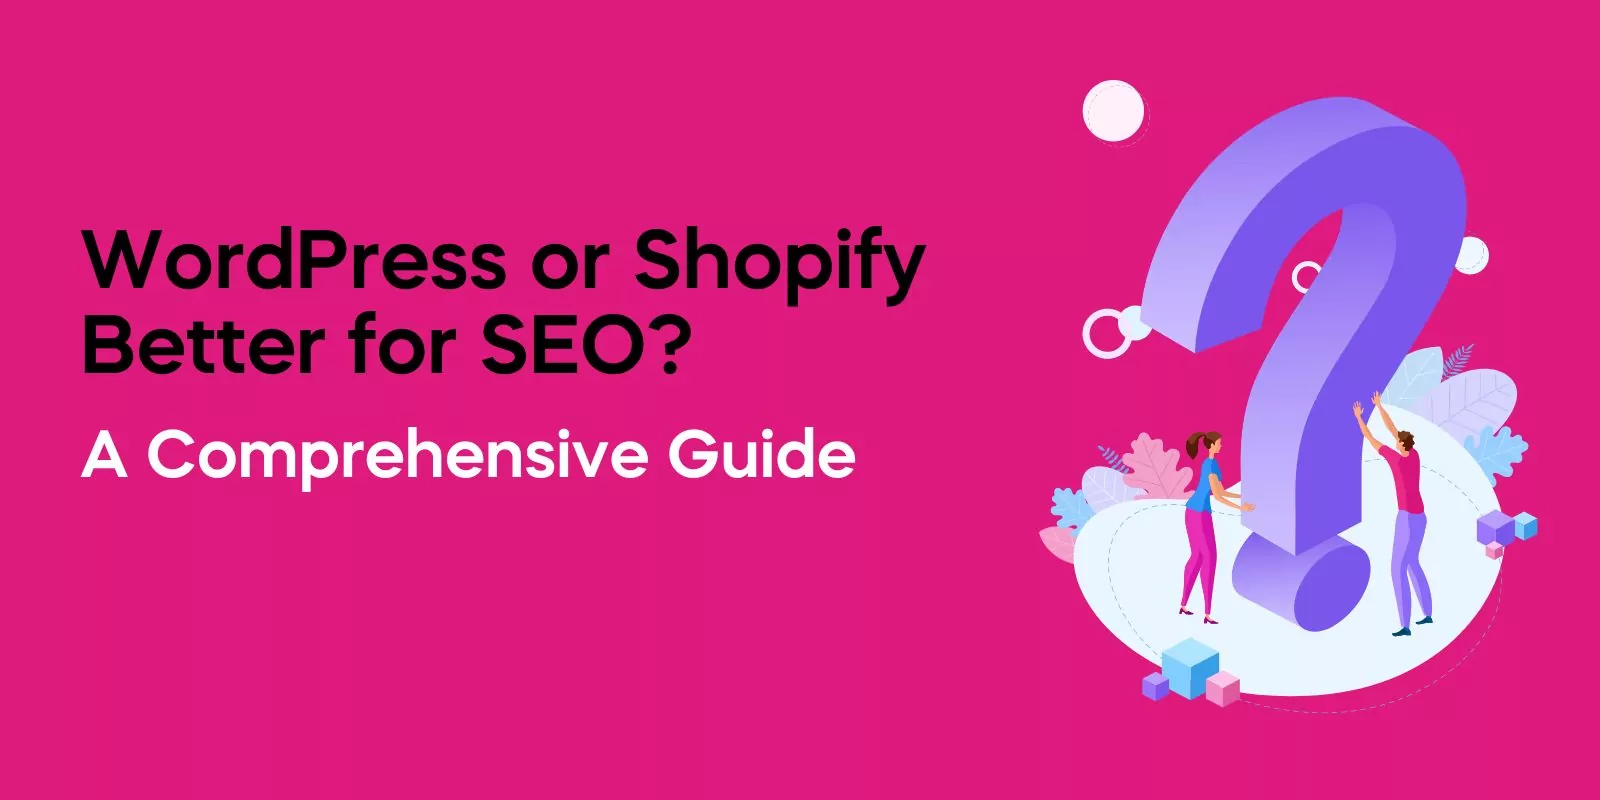 Is WordPress or Shopify Better for SEO? A Comprehensive Guide